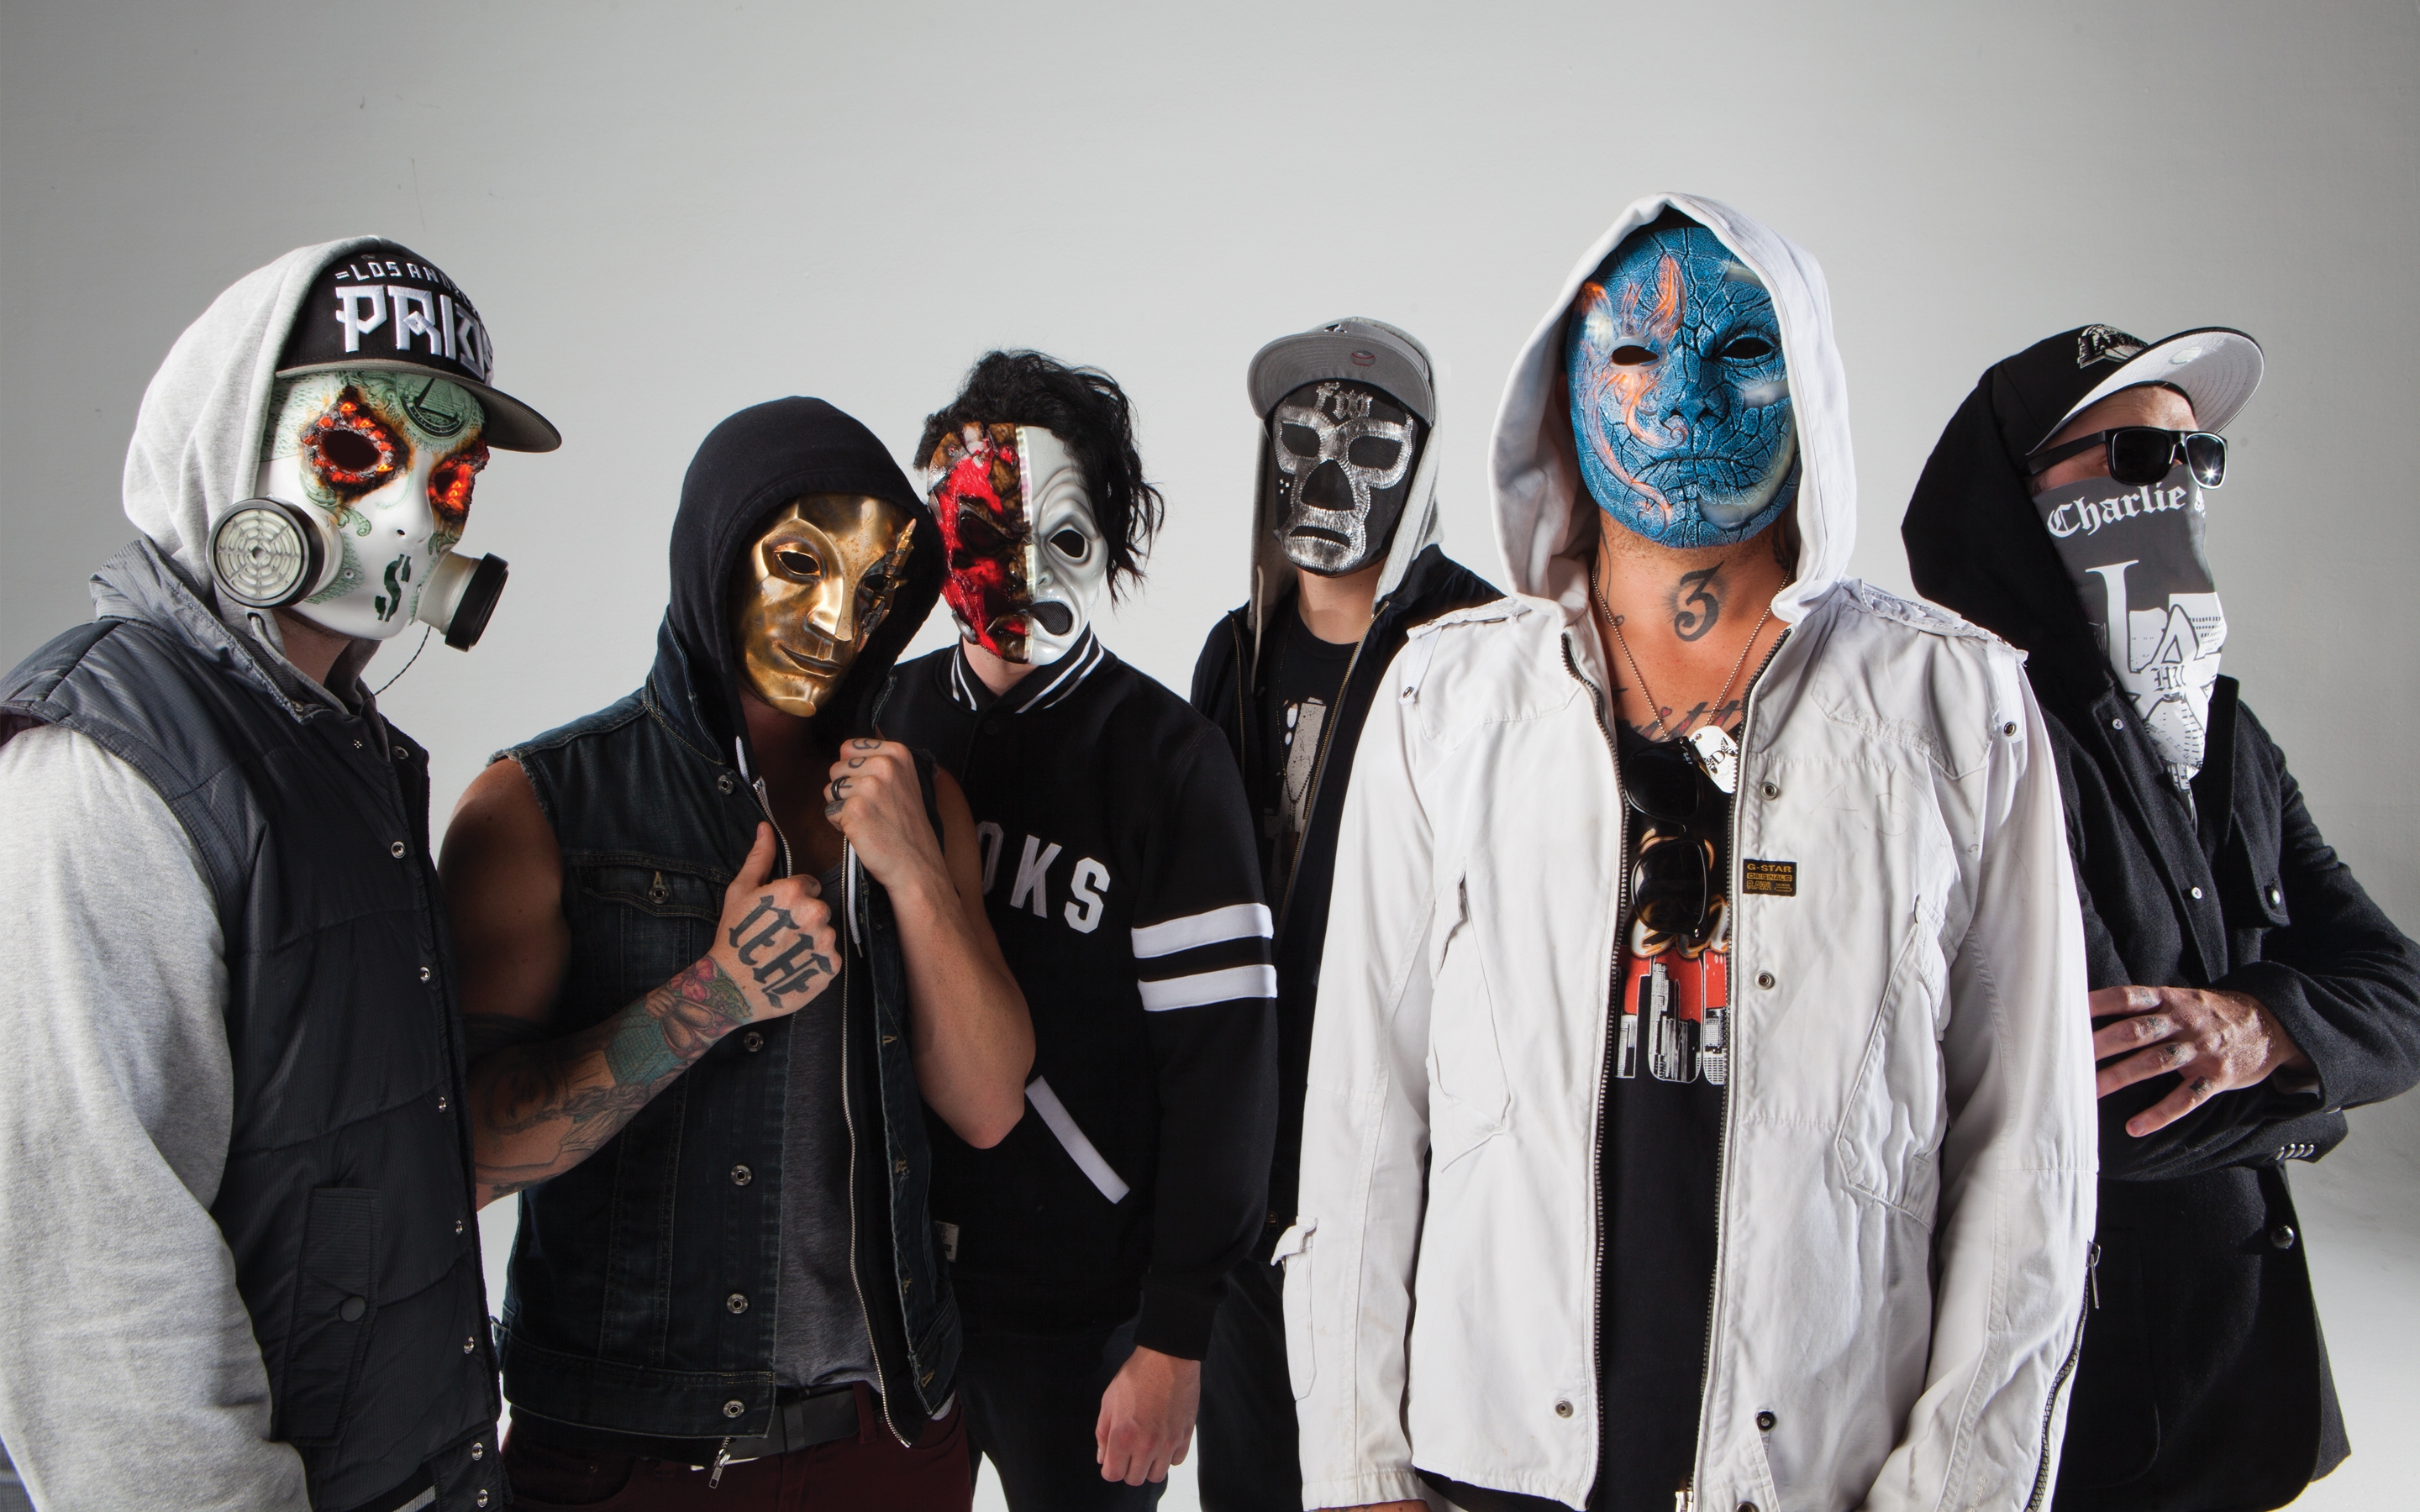 Hollywood Undead Cool for 2880 x 1800 Retina Display resolution